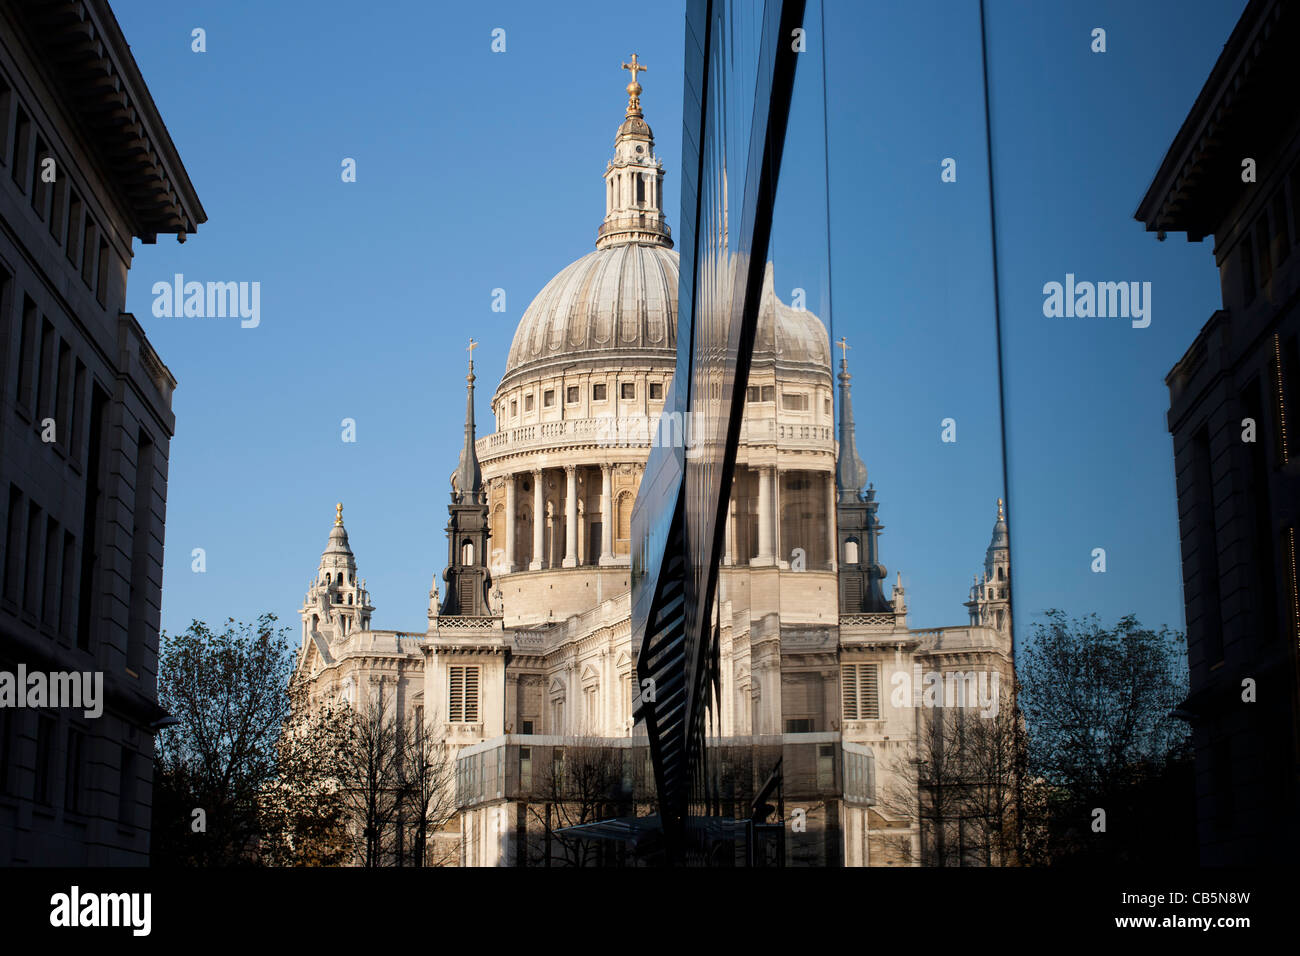 St. Paul’s Cathedral reflected in the glass walls of One New Change shopping centre Cheapside London Stock Photo